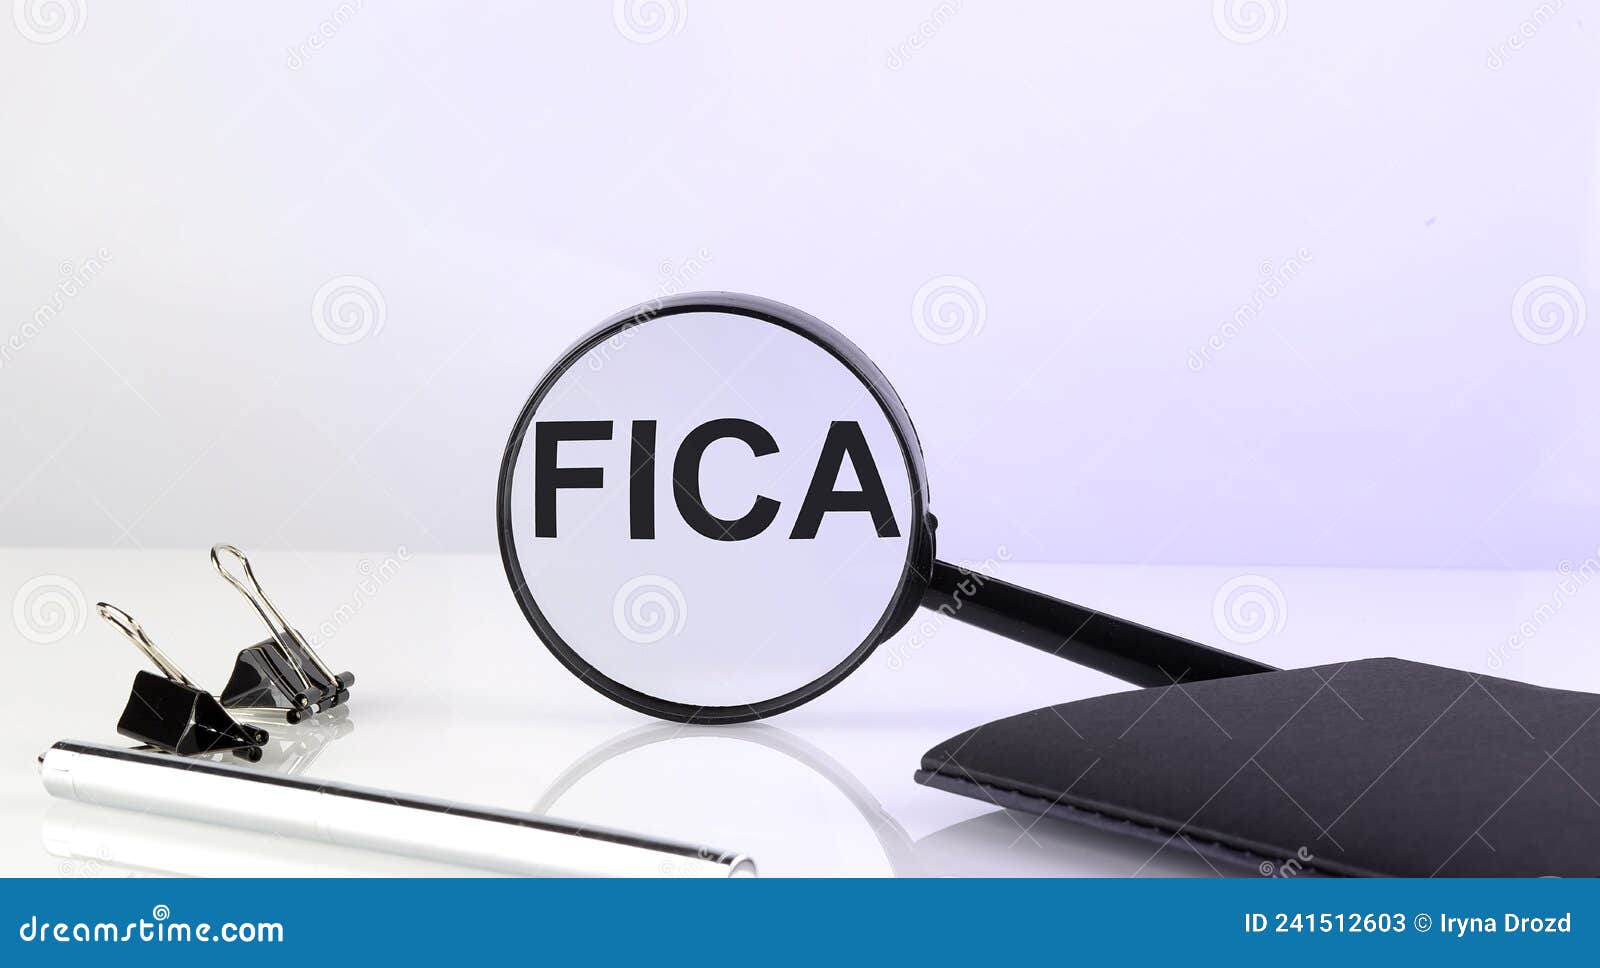 fica concept. magnifier glass with text with notebook and pen